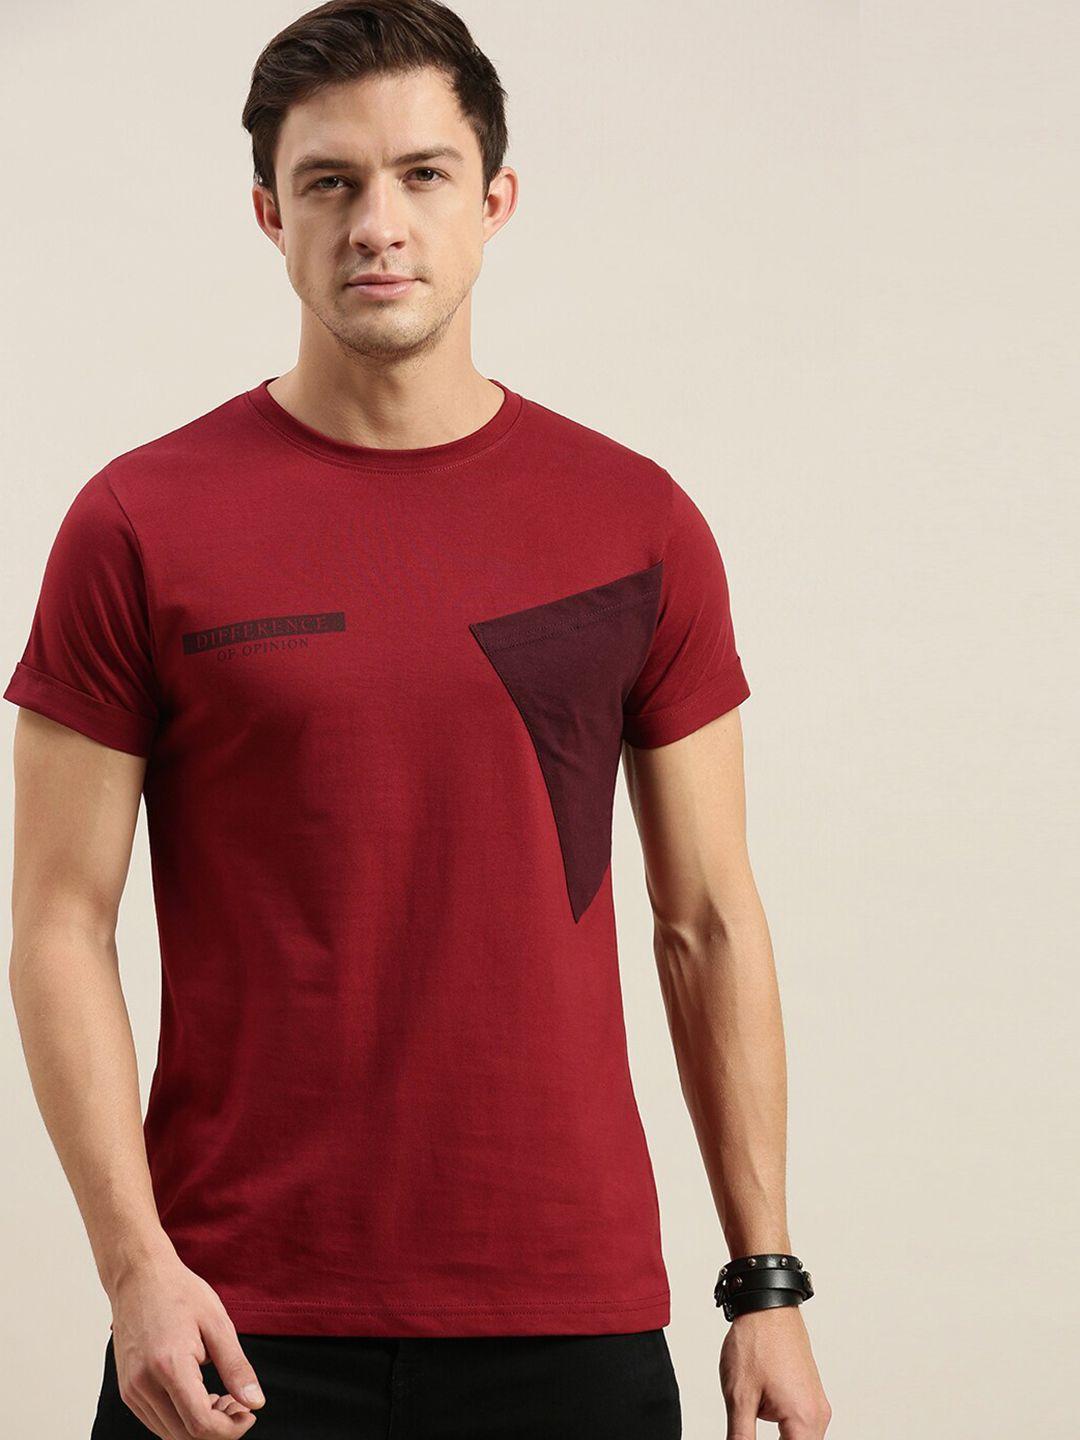 difference of opinion men maroon colourblocked cotton t-shirt